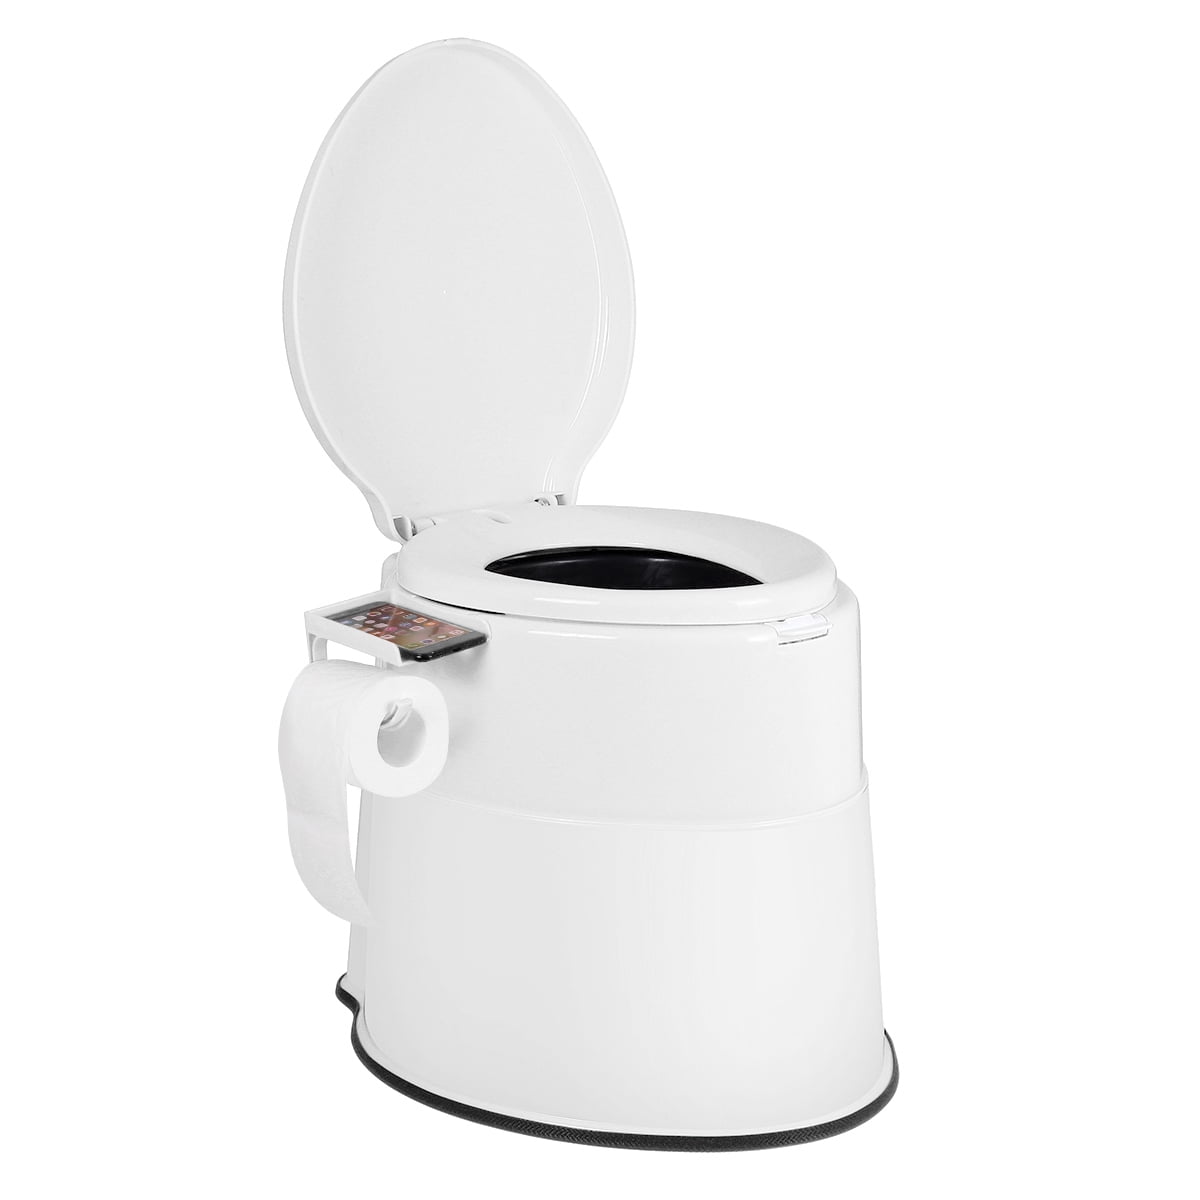 16inch/18inch Height Portable Toilet with Waste Tank Soft ...